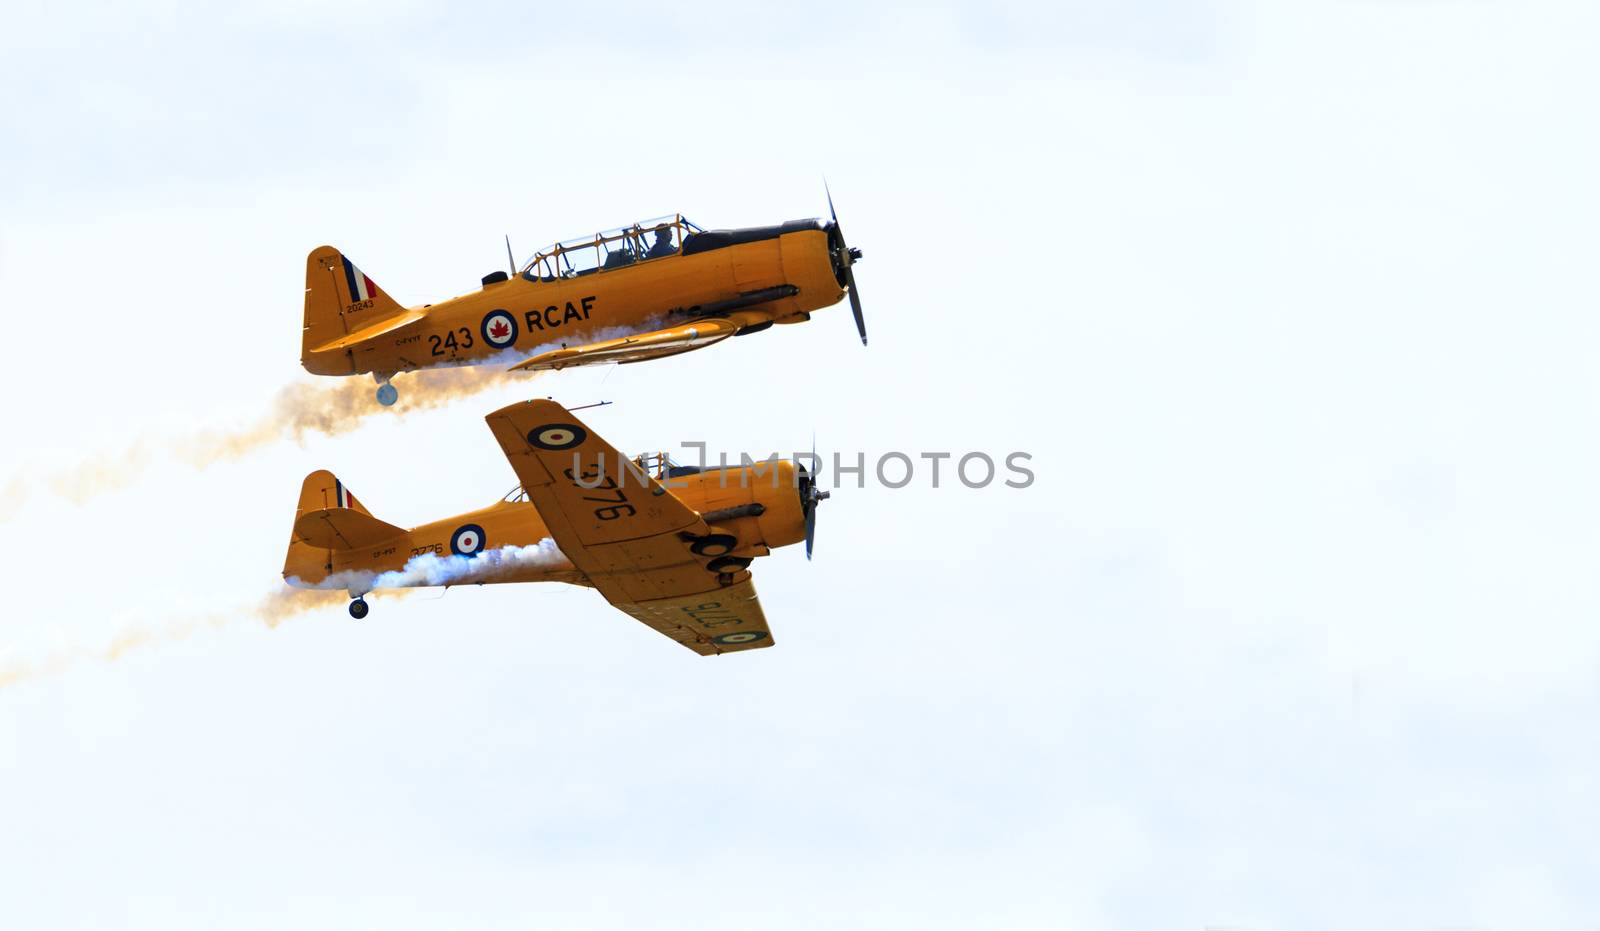 LETHBRIDGE CANADA 25 JUN 2015: International Air Show and Open House for Canadian, USA and British current and historical military and civilian aircrafts. There were also numerous flights as well.